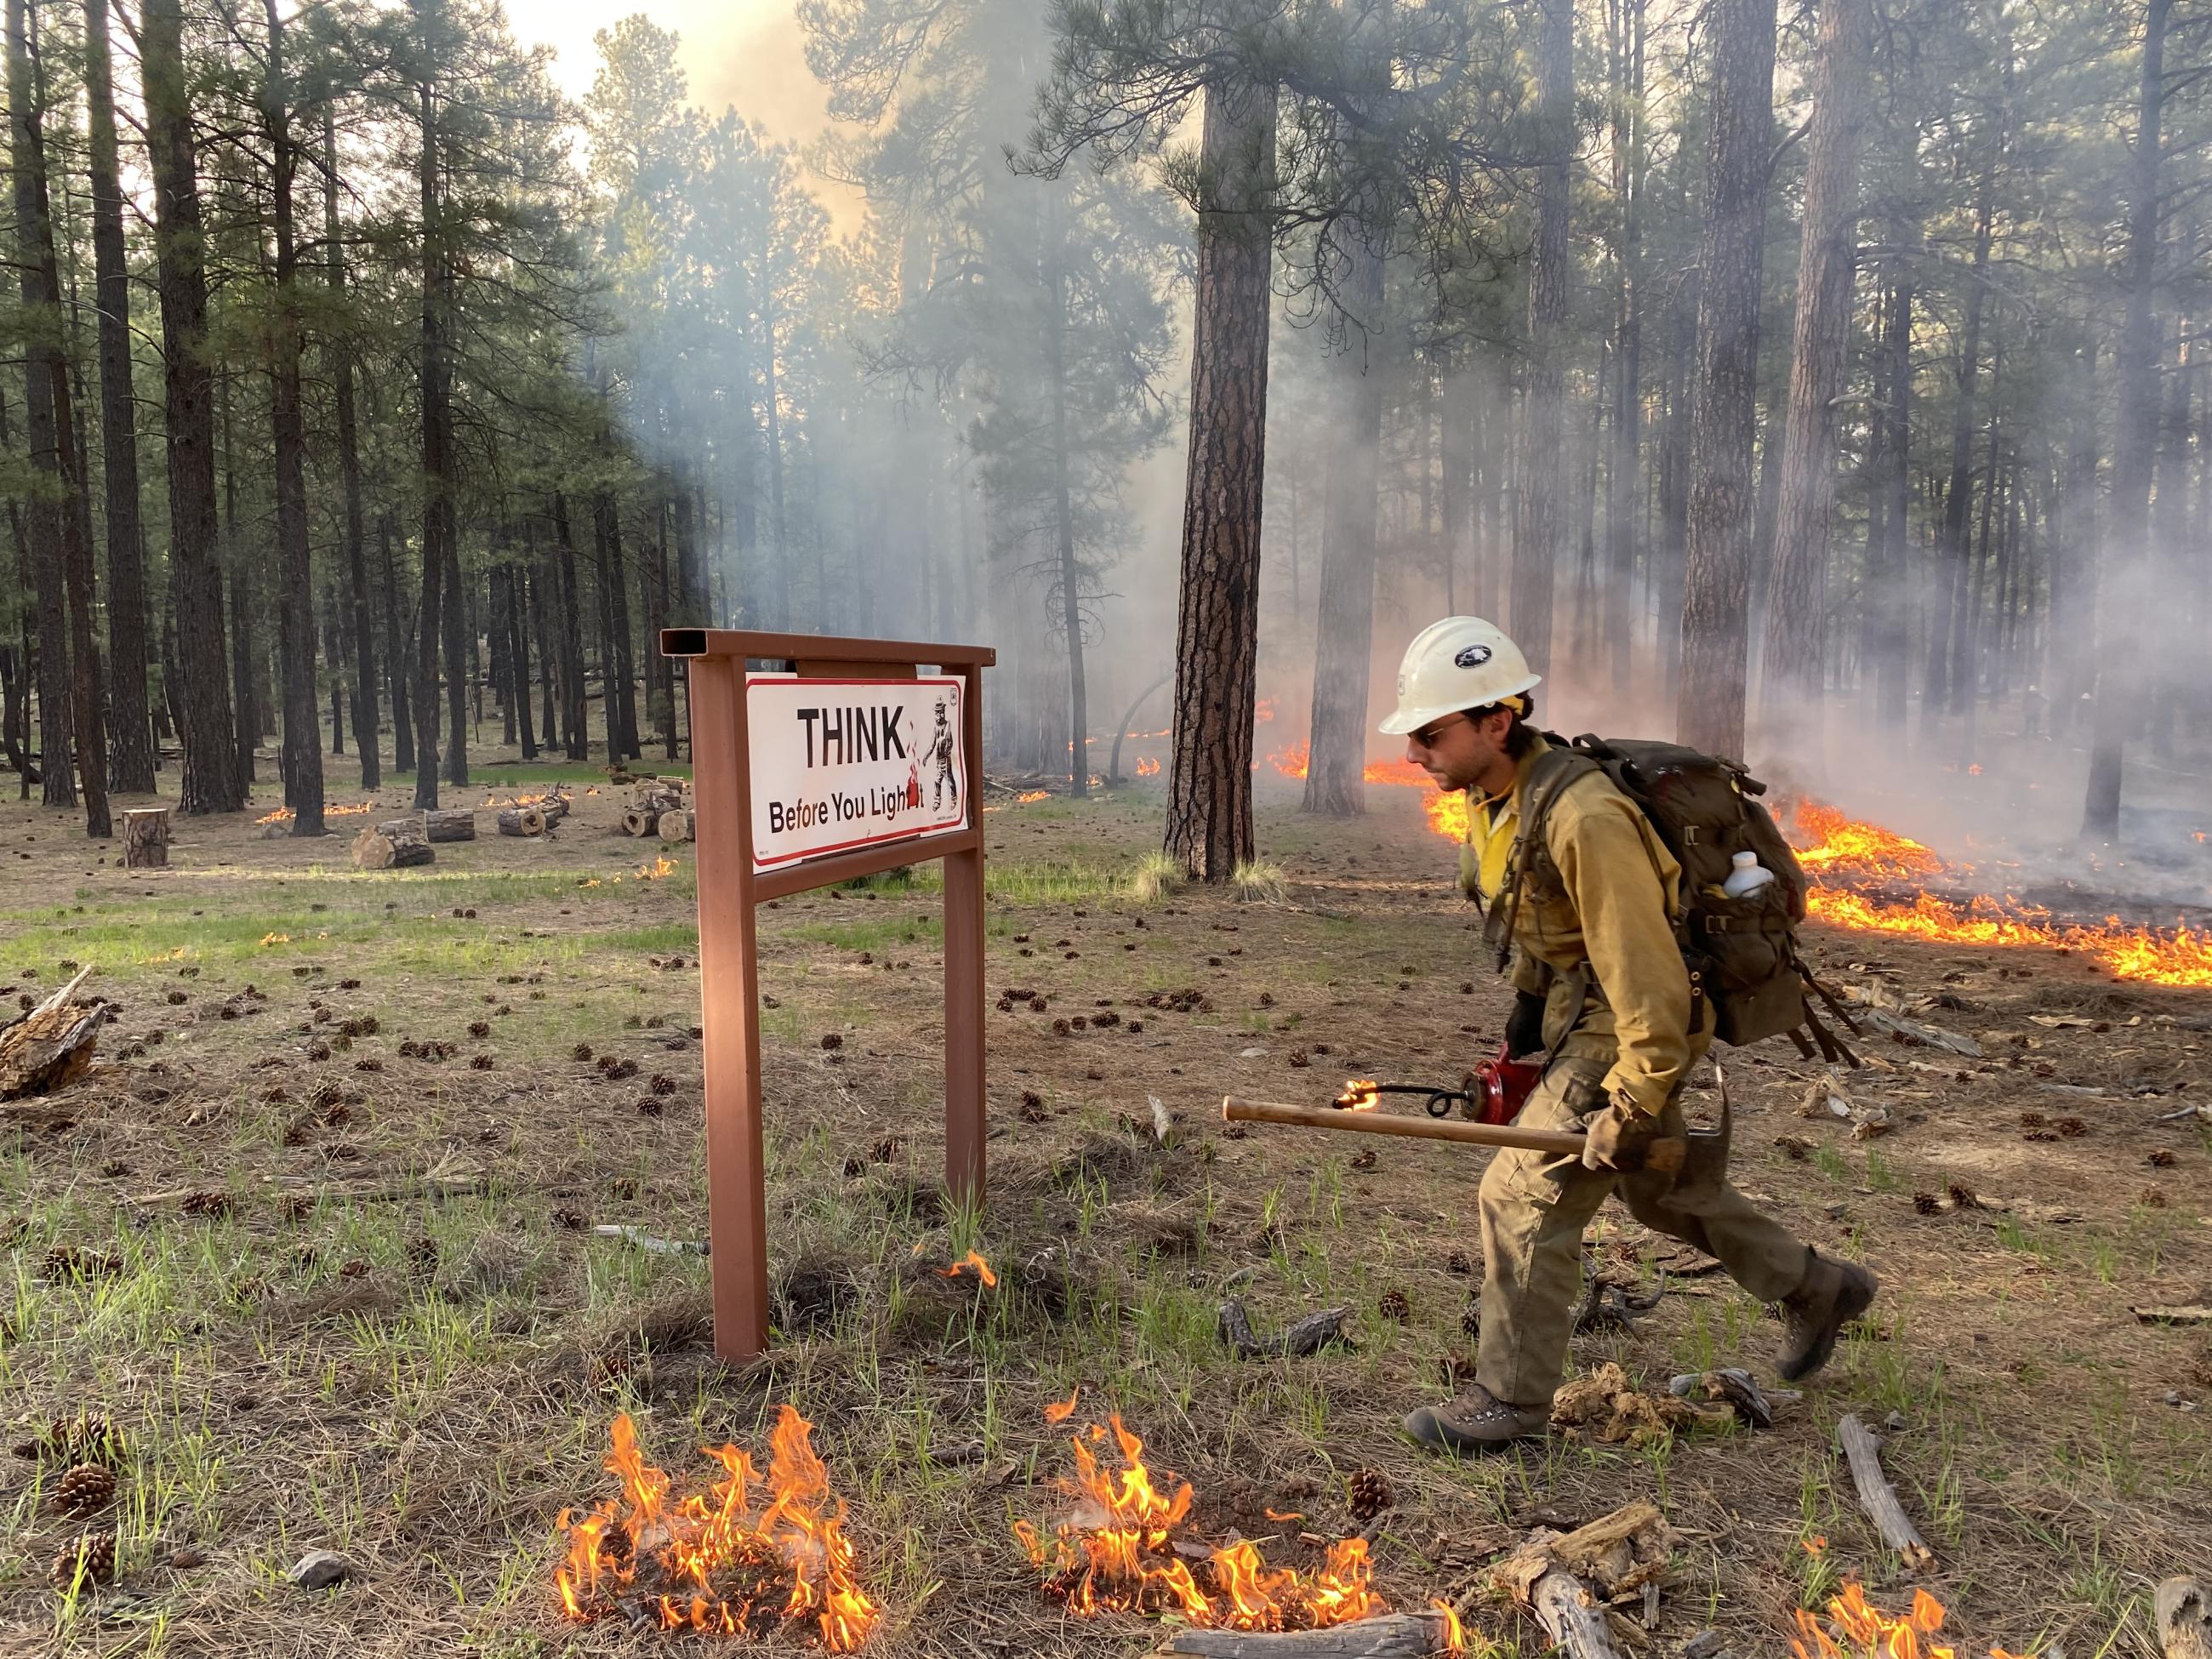 A firefighter in green pants, a yellow shirt and a white hard hat carries a red driptorch while fire and smoke burn along the ground. A sign reads "think before you light" in the background.